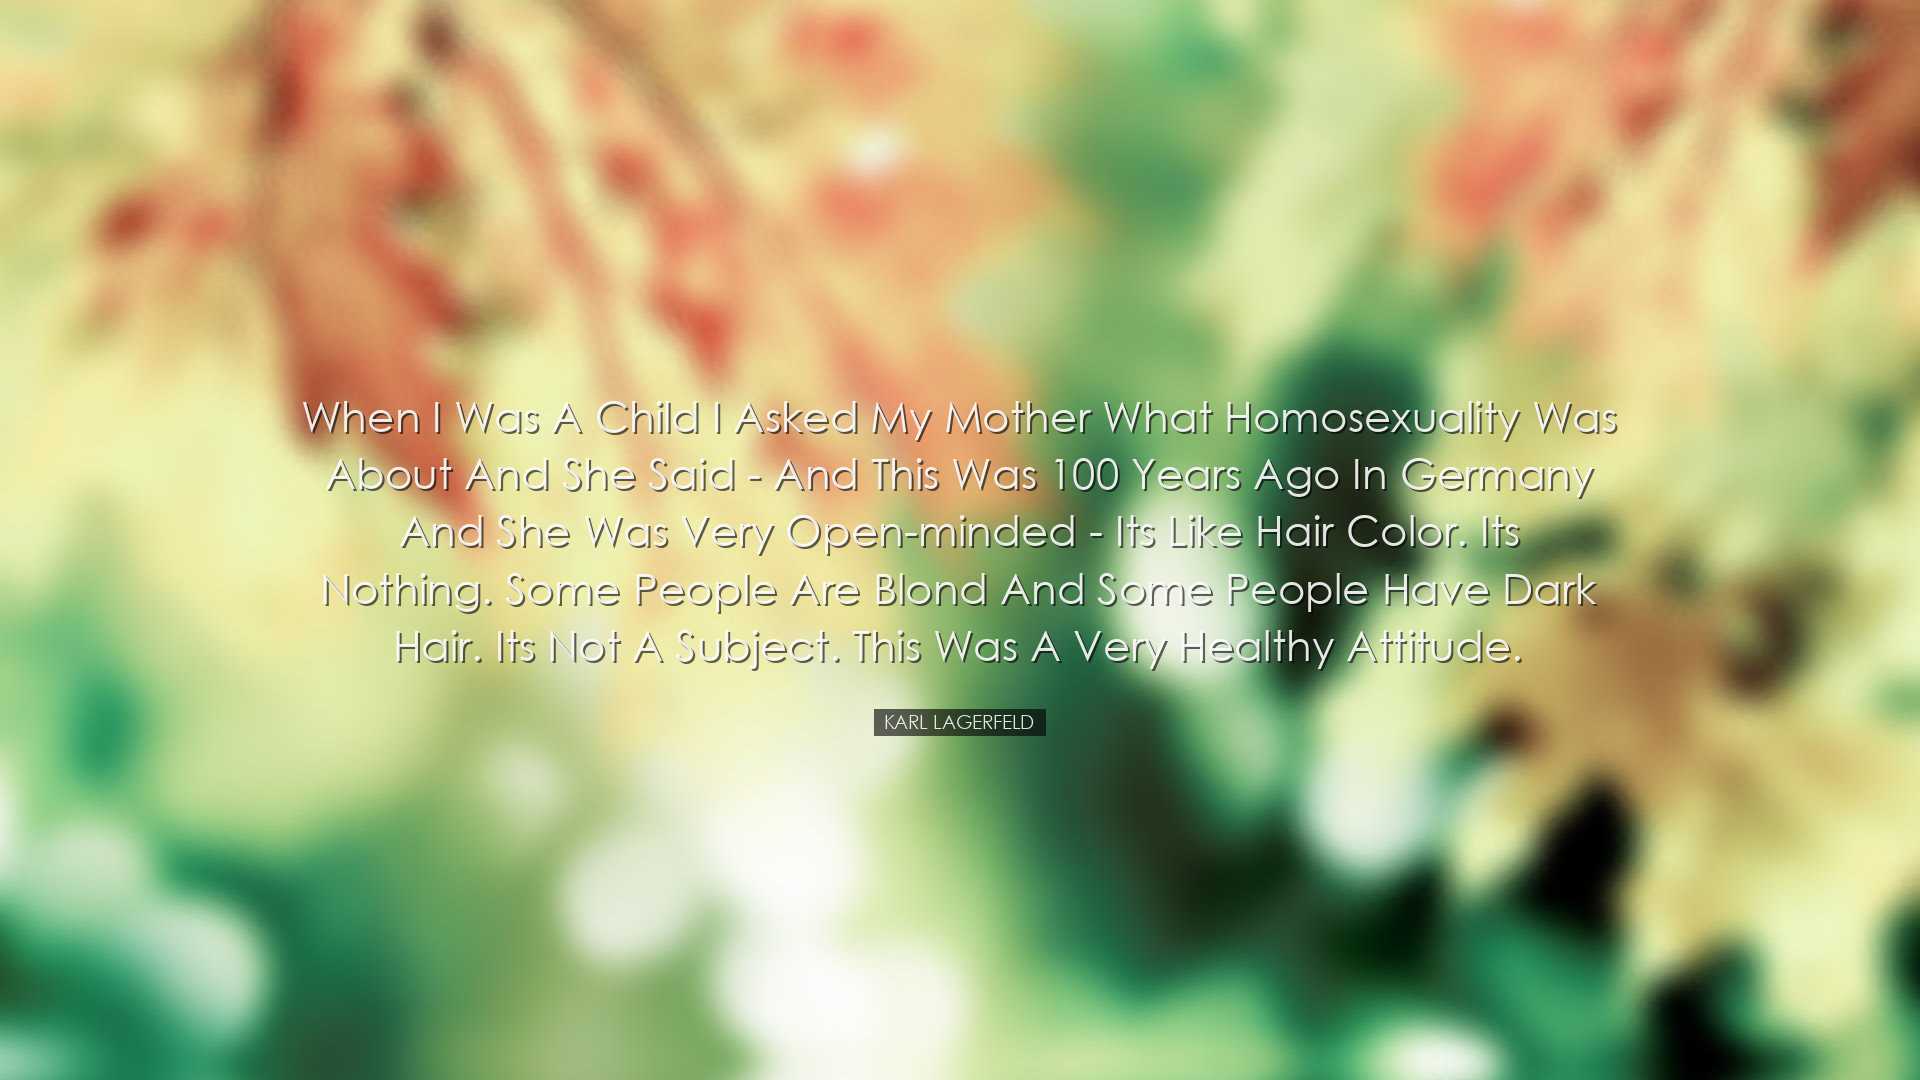 When I was a child I asked my mother what homosexuality was about